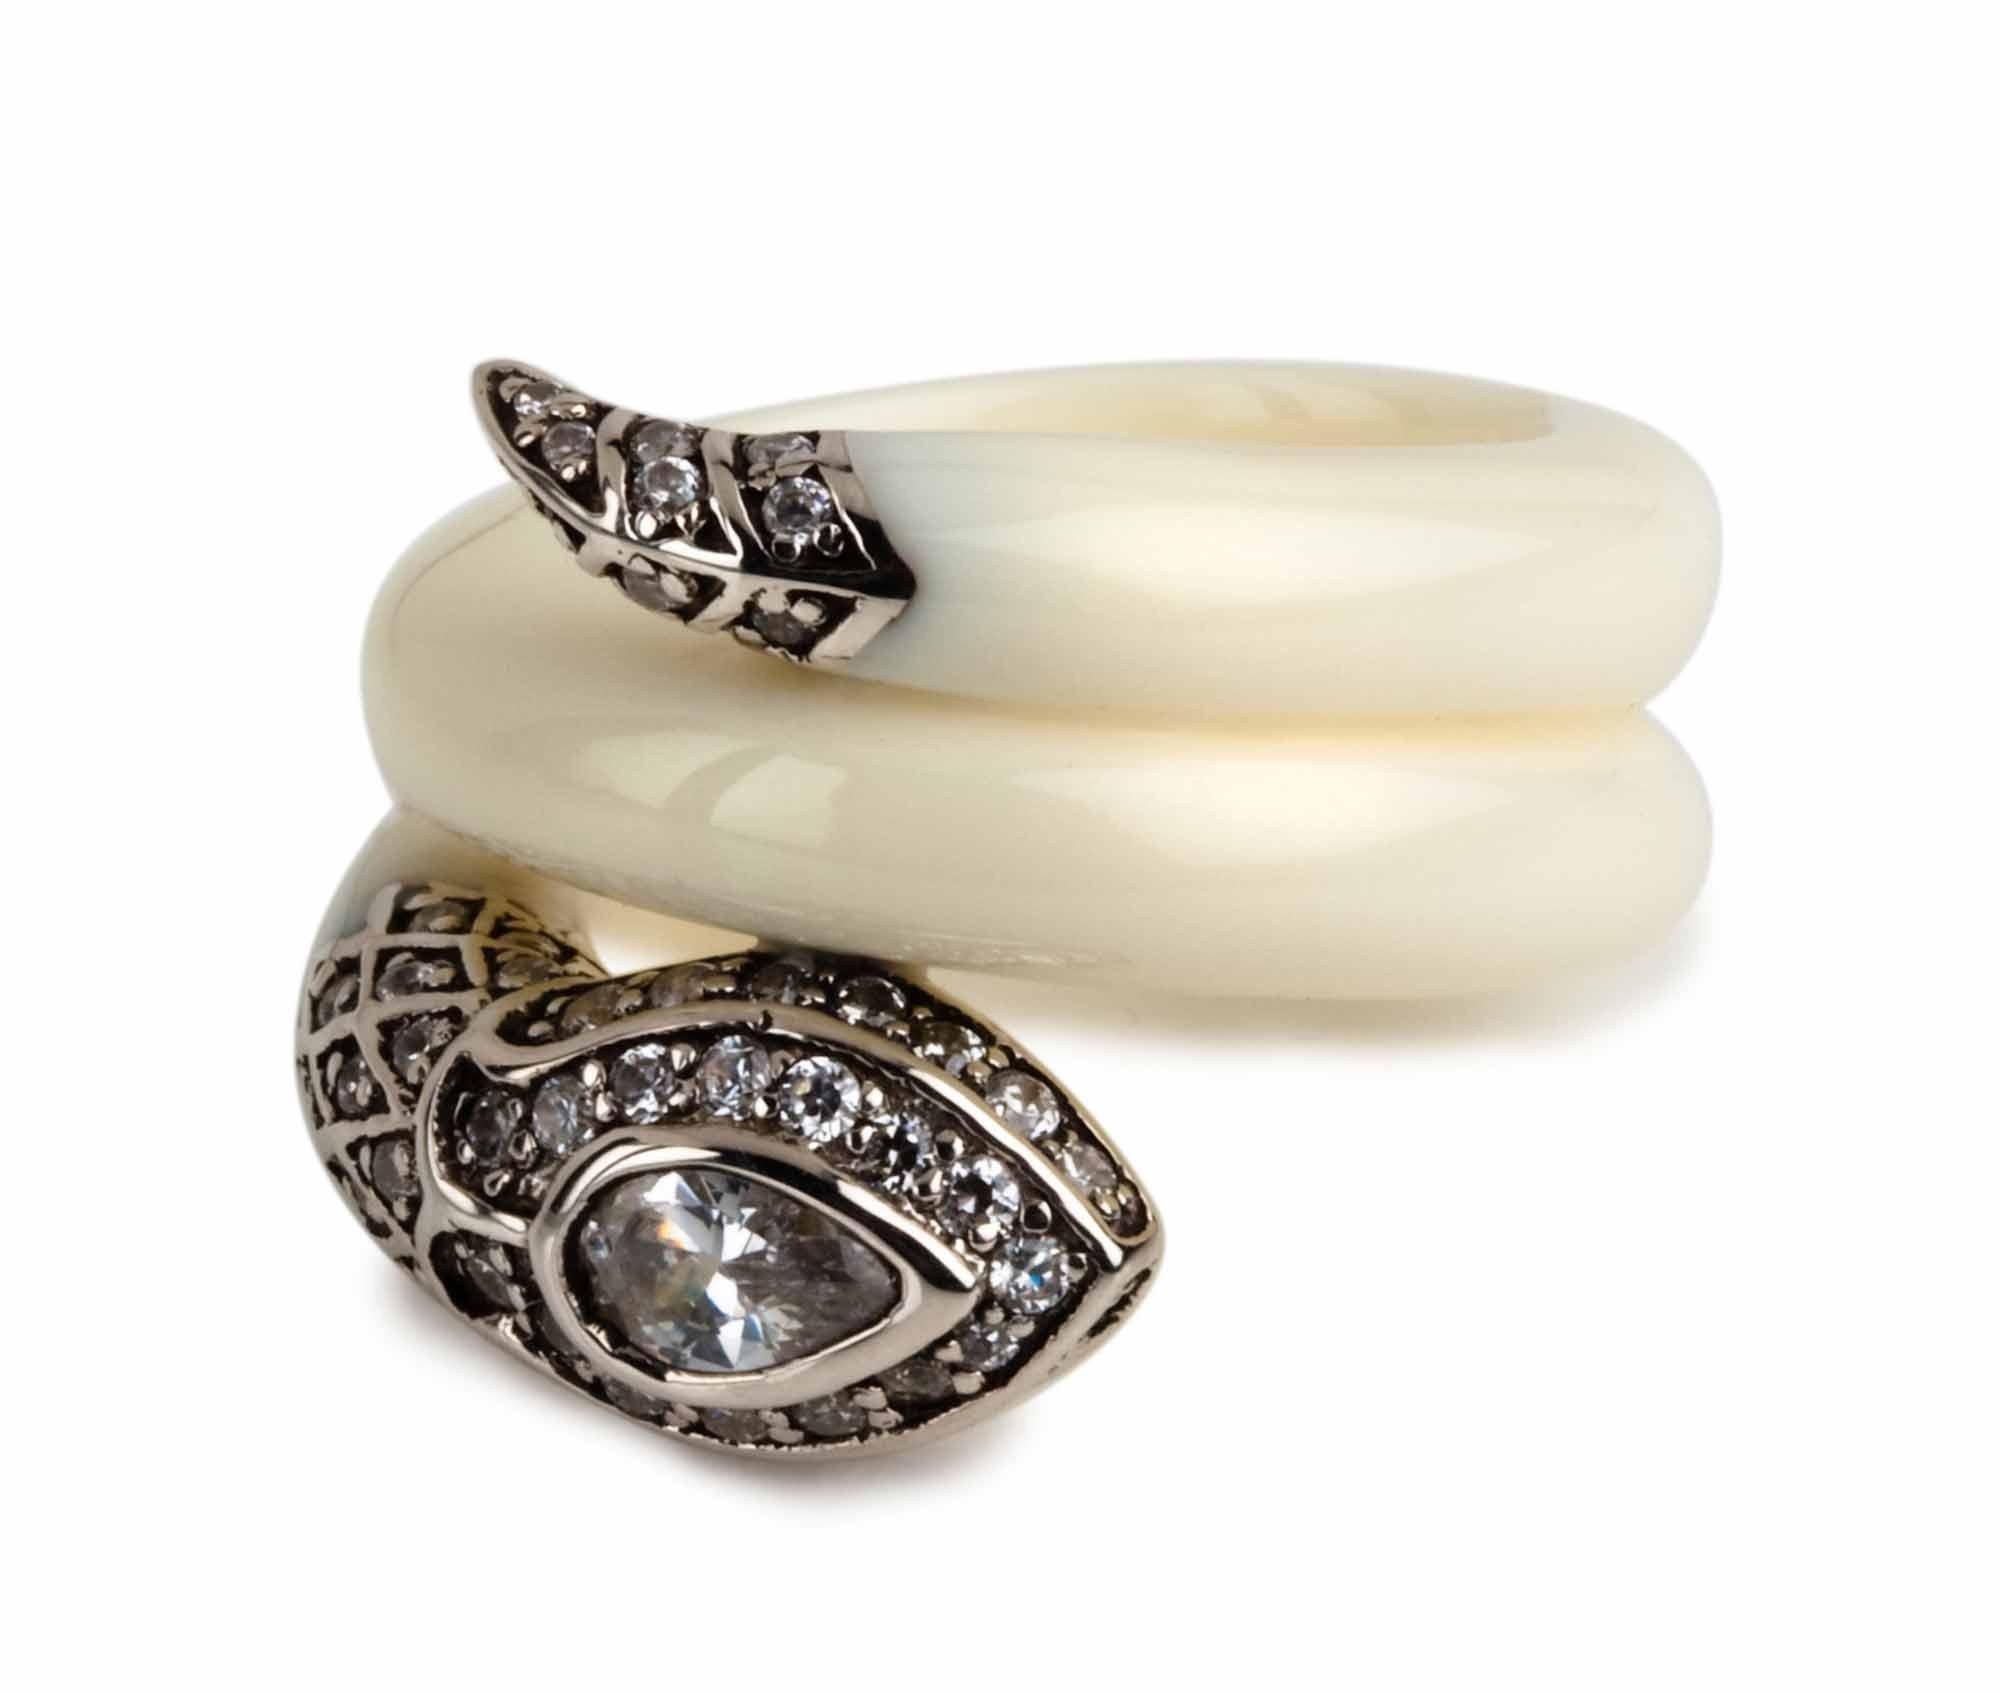 Miriam Salat Serpentine Cleopatra Flex ring 
Beautiful Serpentine flexible ring with fantastic design and attention to detail. 
Ivory cream resin.
Sterling silver flex and adjust ring. 
Blackened sliver plates. 
Full cut White Topaz stones accents